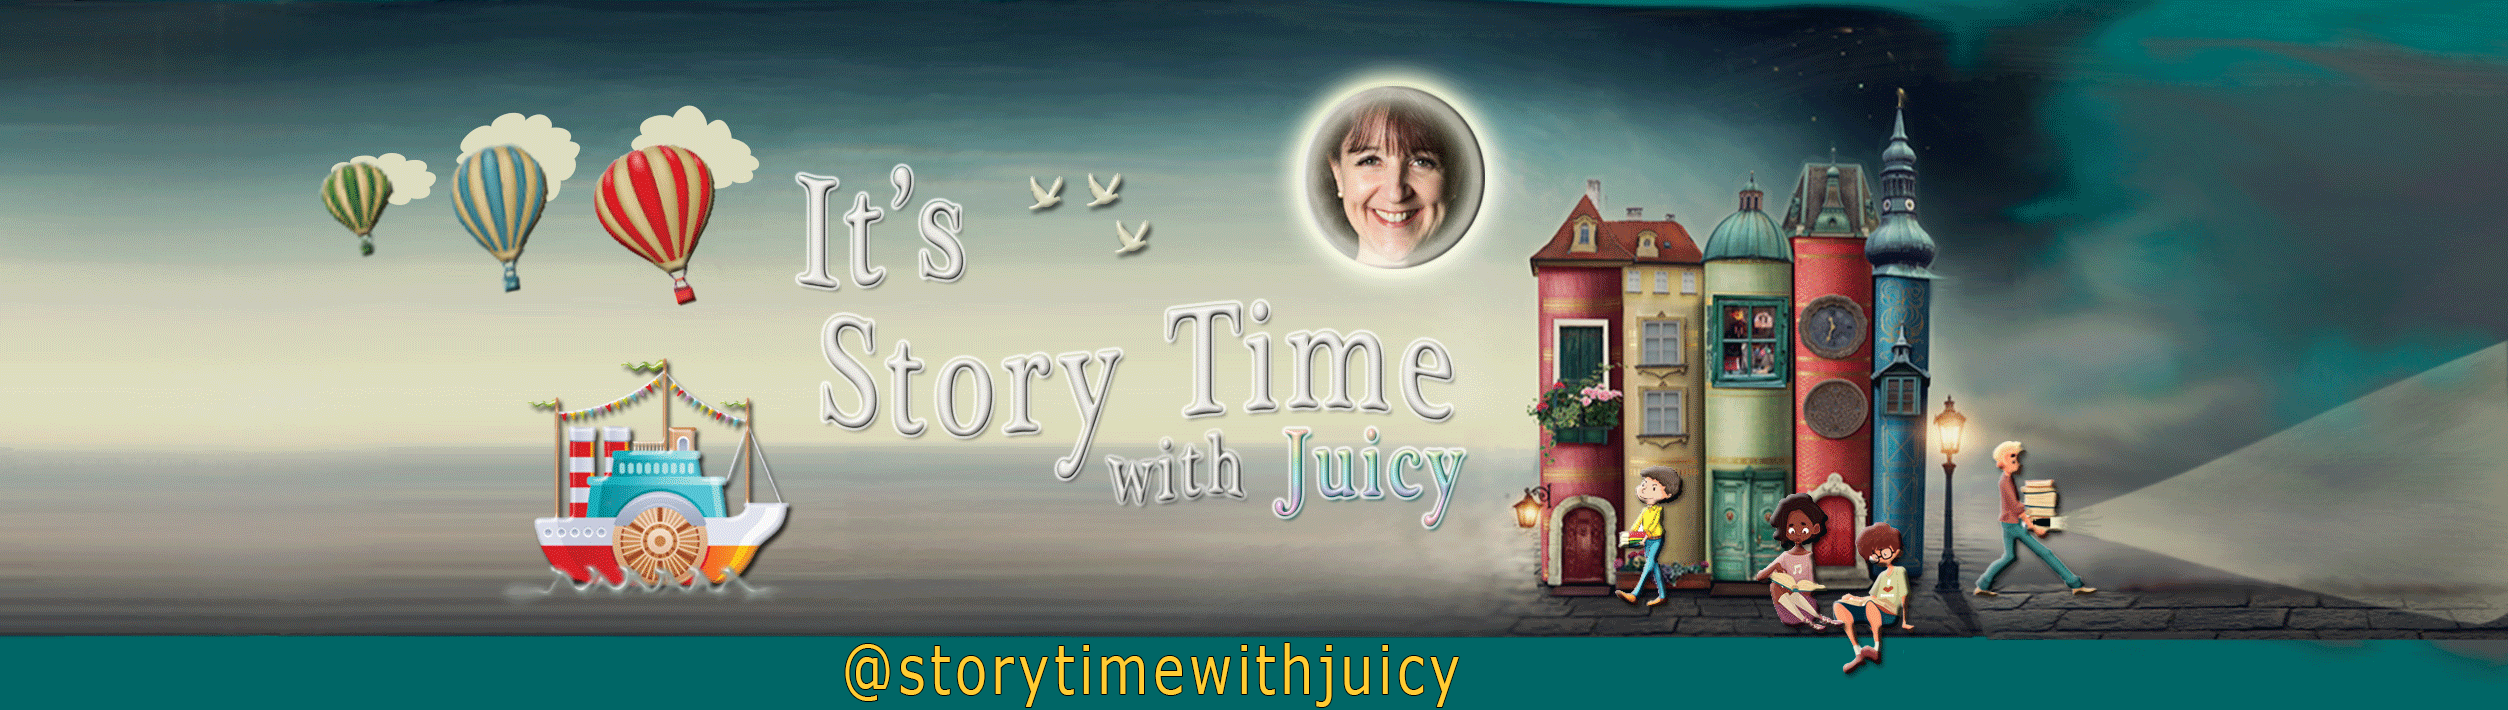 It's Story Time with Juicy